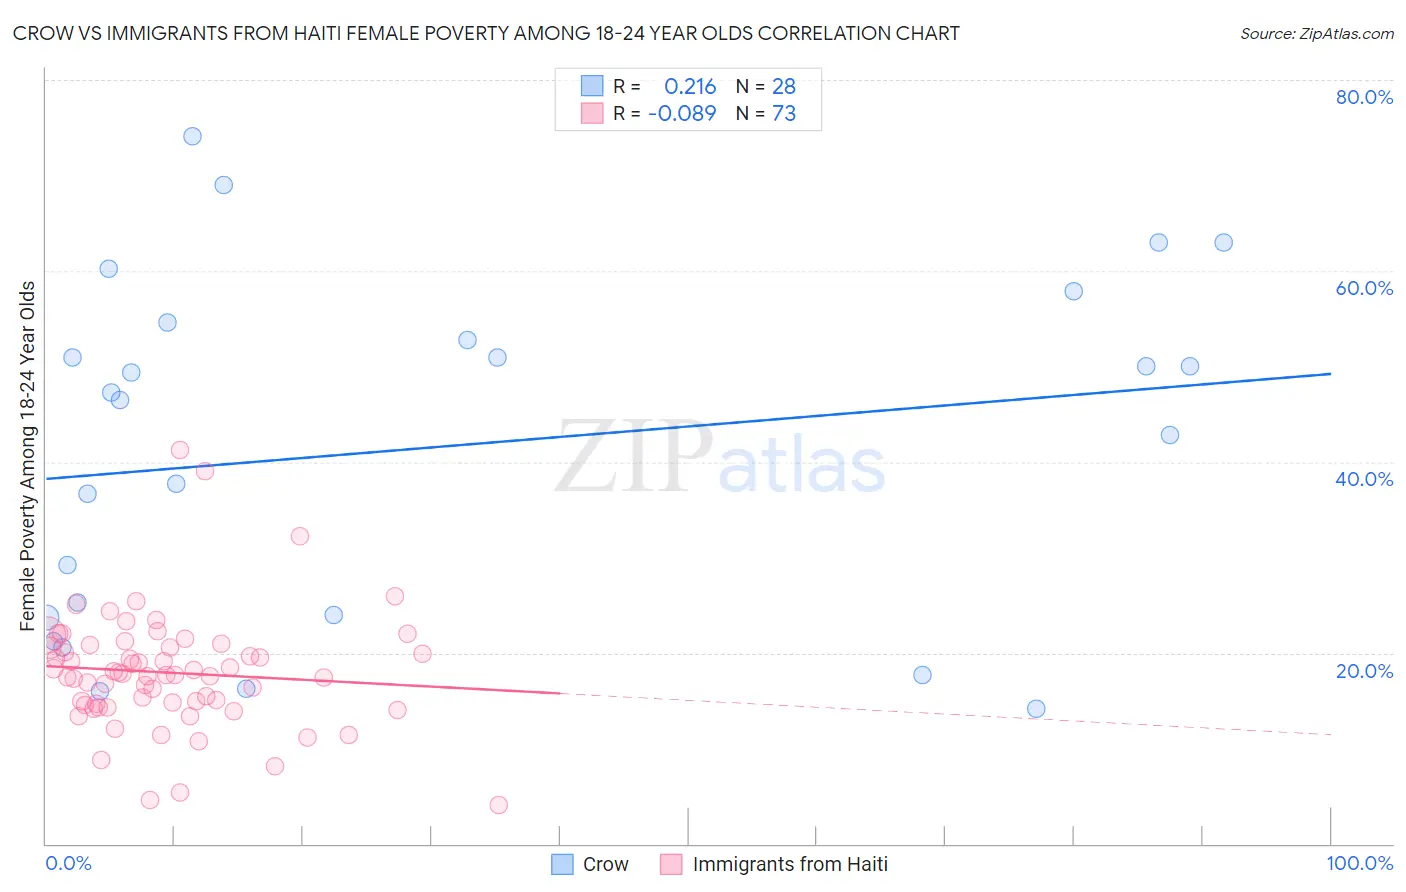 Crow vs Immigrants from Haiti Female Poverty Among 18-24 Year Olds